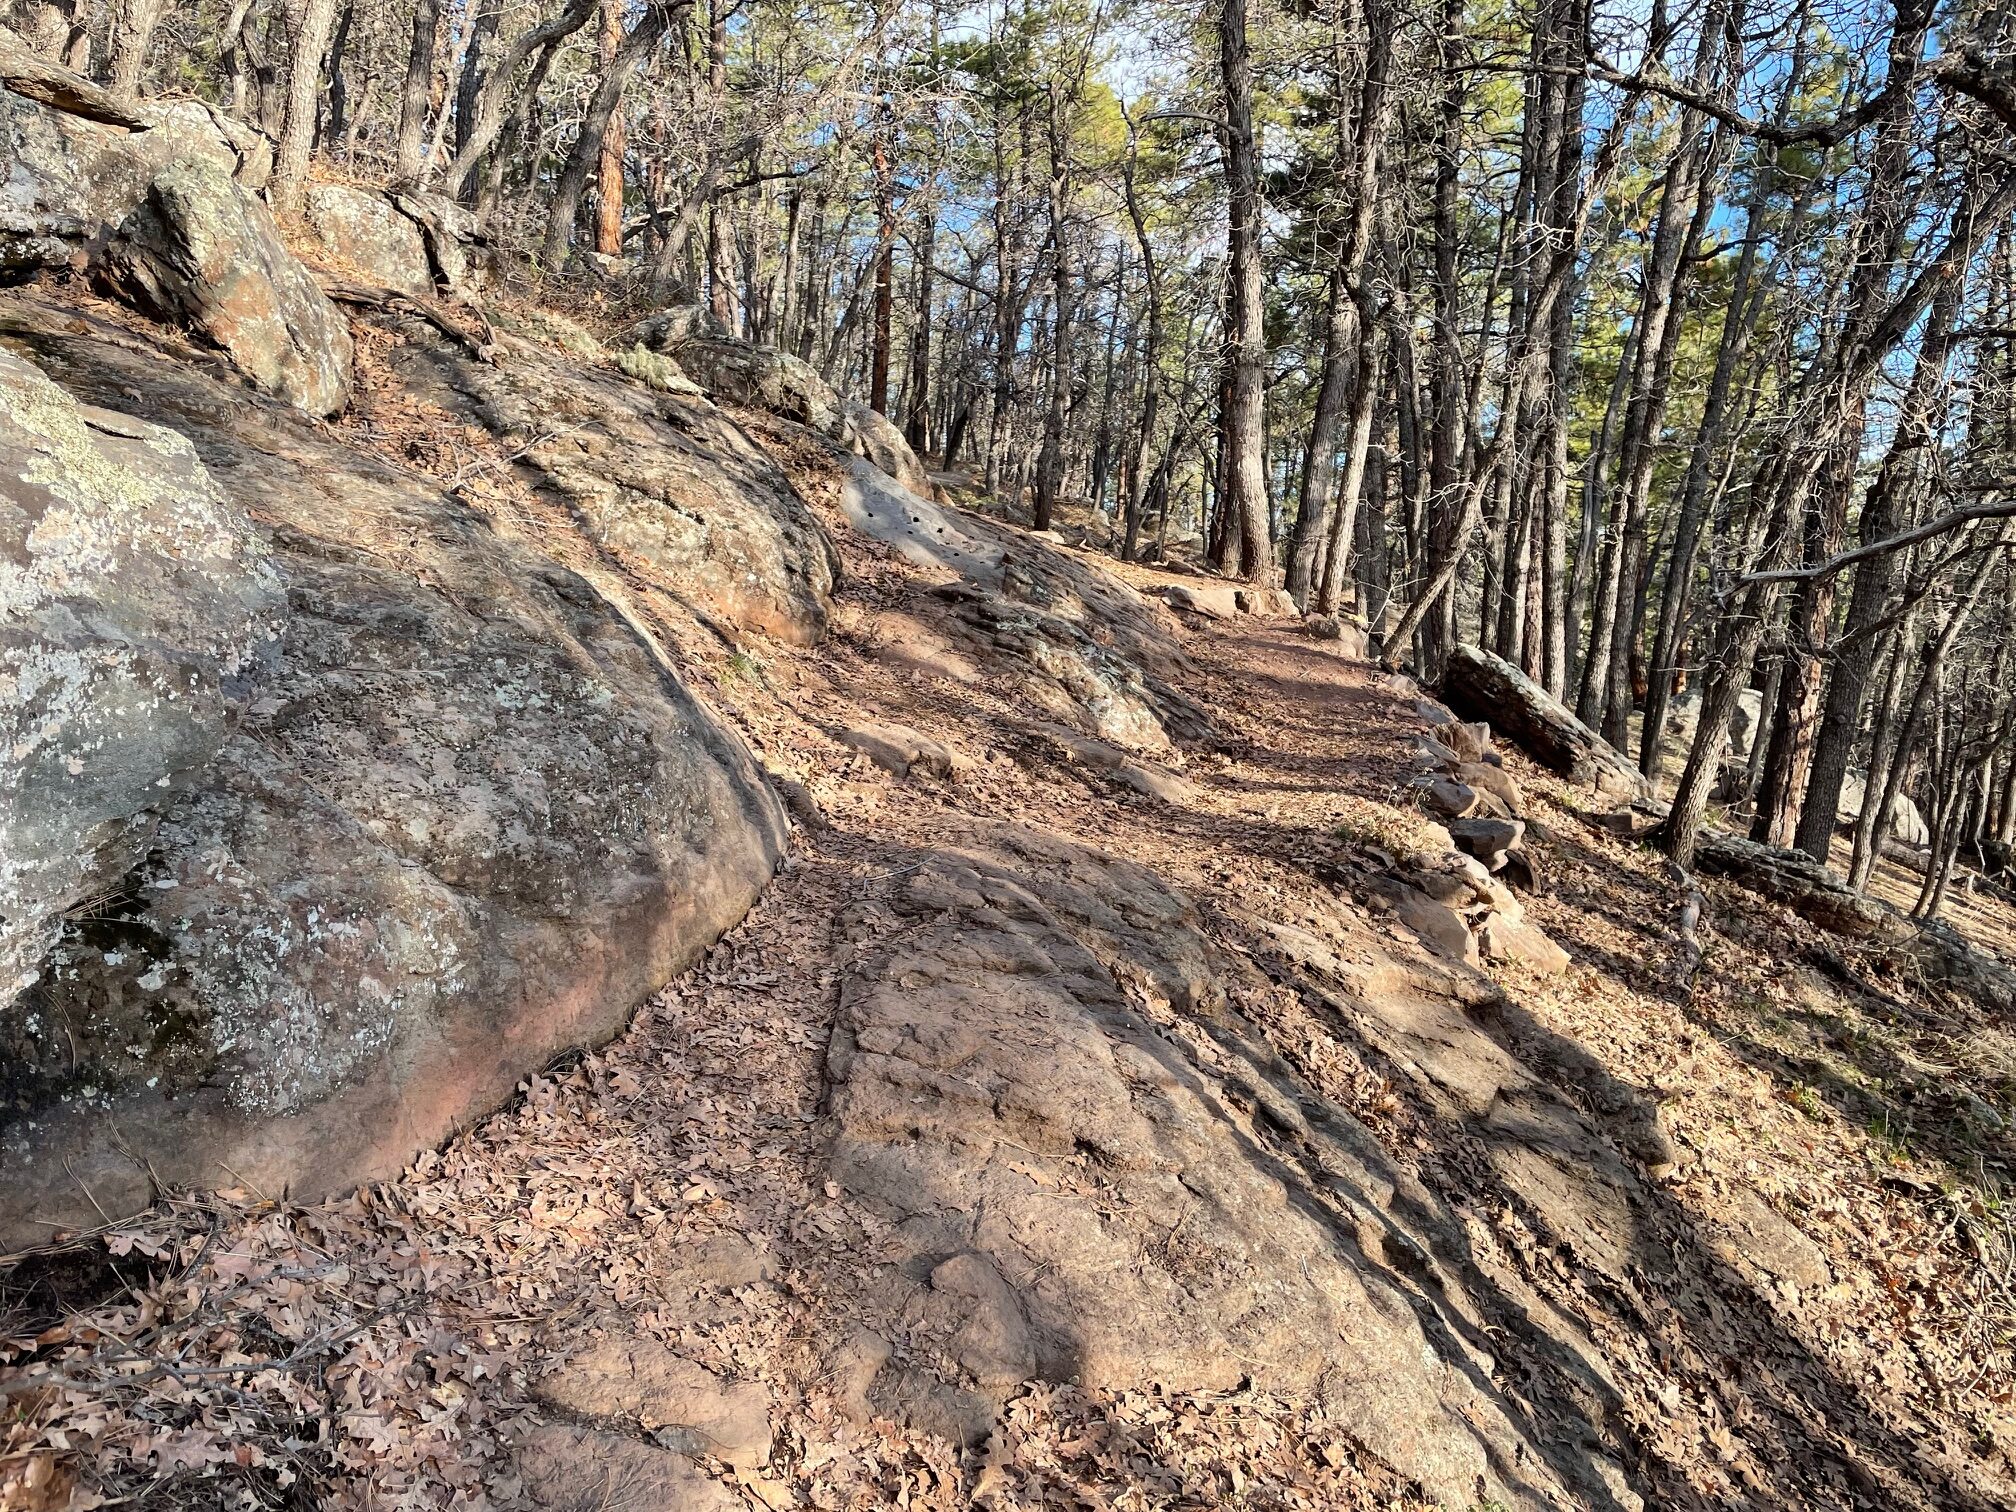 Trail Review: Rogers Trail/Woody Mountain Forest Road Loop